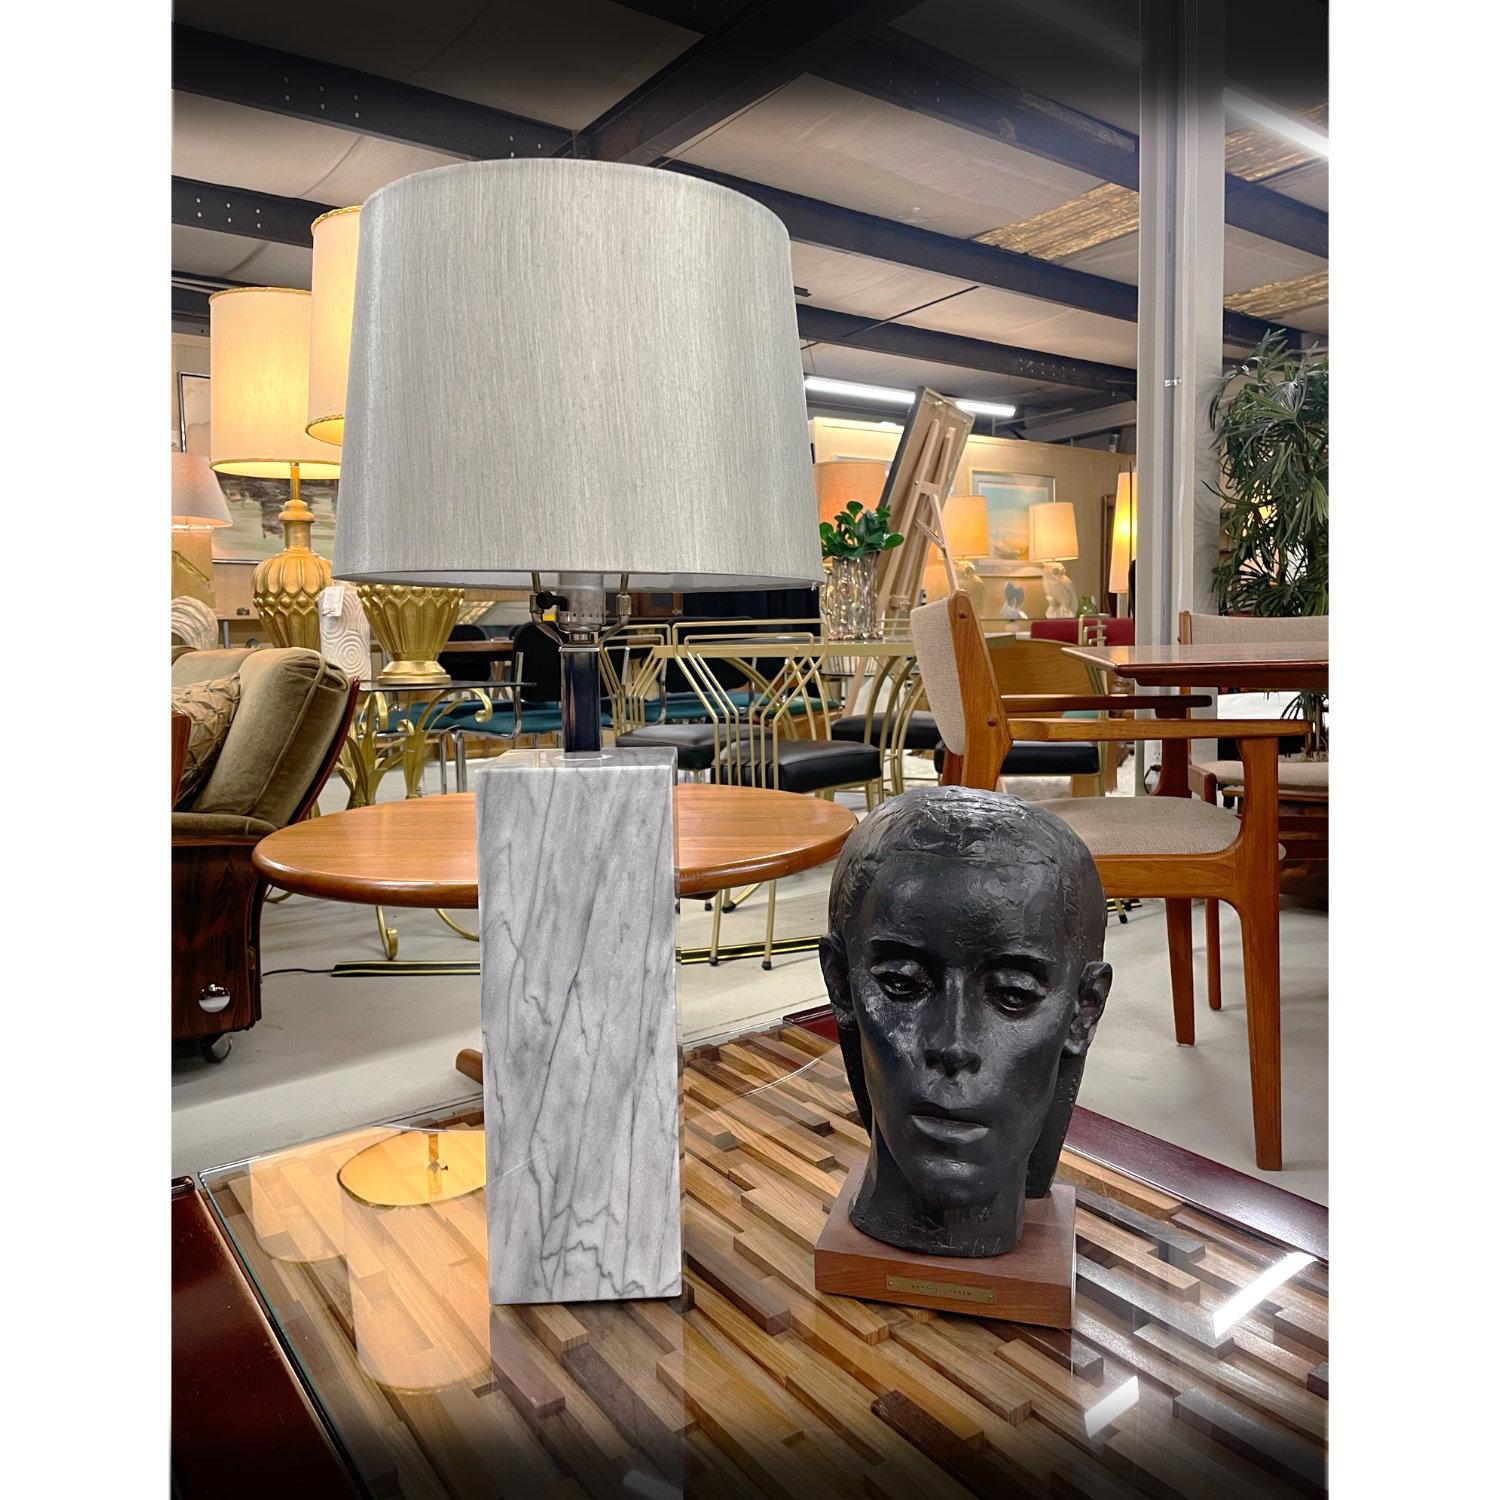 Lamp shade is NOT included with purchase.

Chic gray marble table lamp designed in the manner of Nessen. The minimalist modern lamp is a single square column with a chrome neck. The lamps takes a single bulb. LED and traditional bulbs can be used